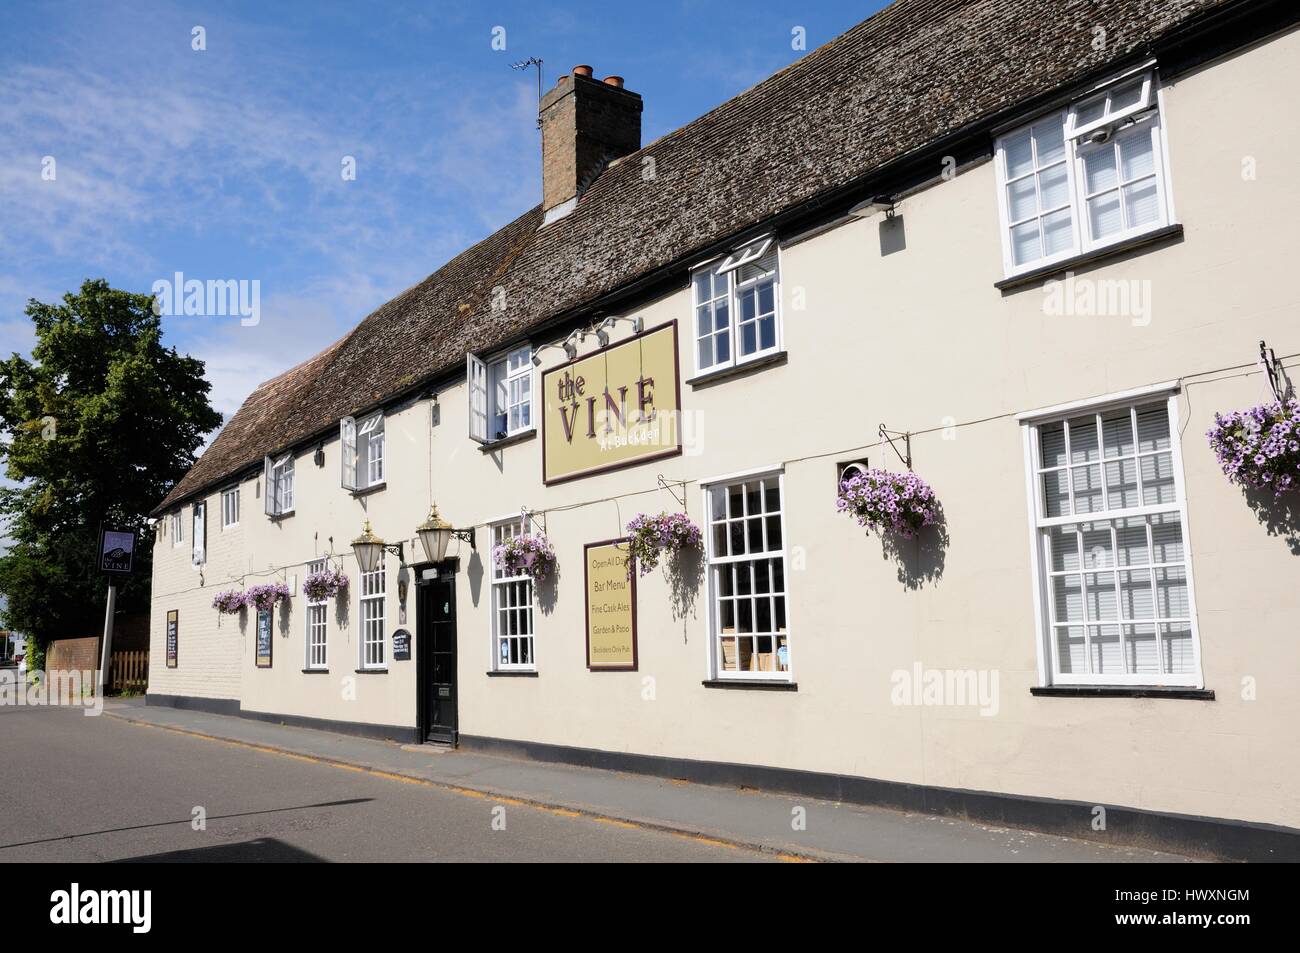 The Vine, Buckden, Cambridgeshire, is the only remaining traditional pub in the village. It once had its own brewery. Stock Photo